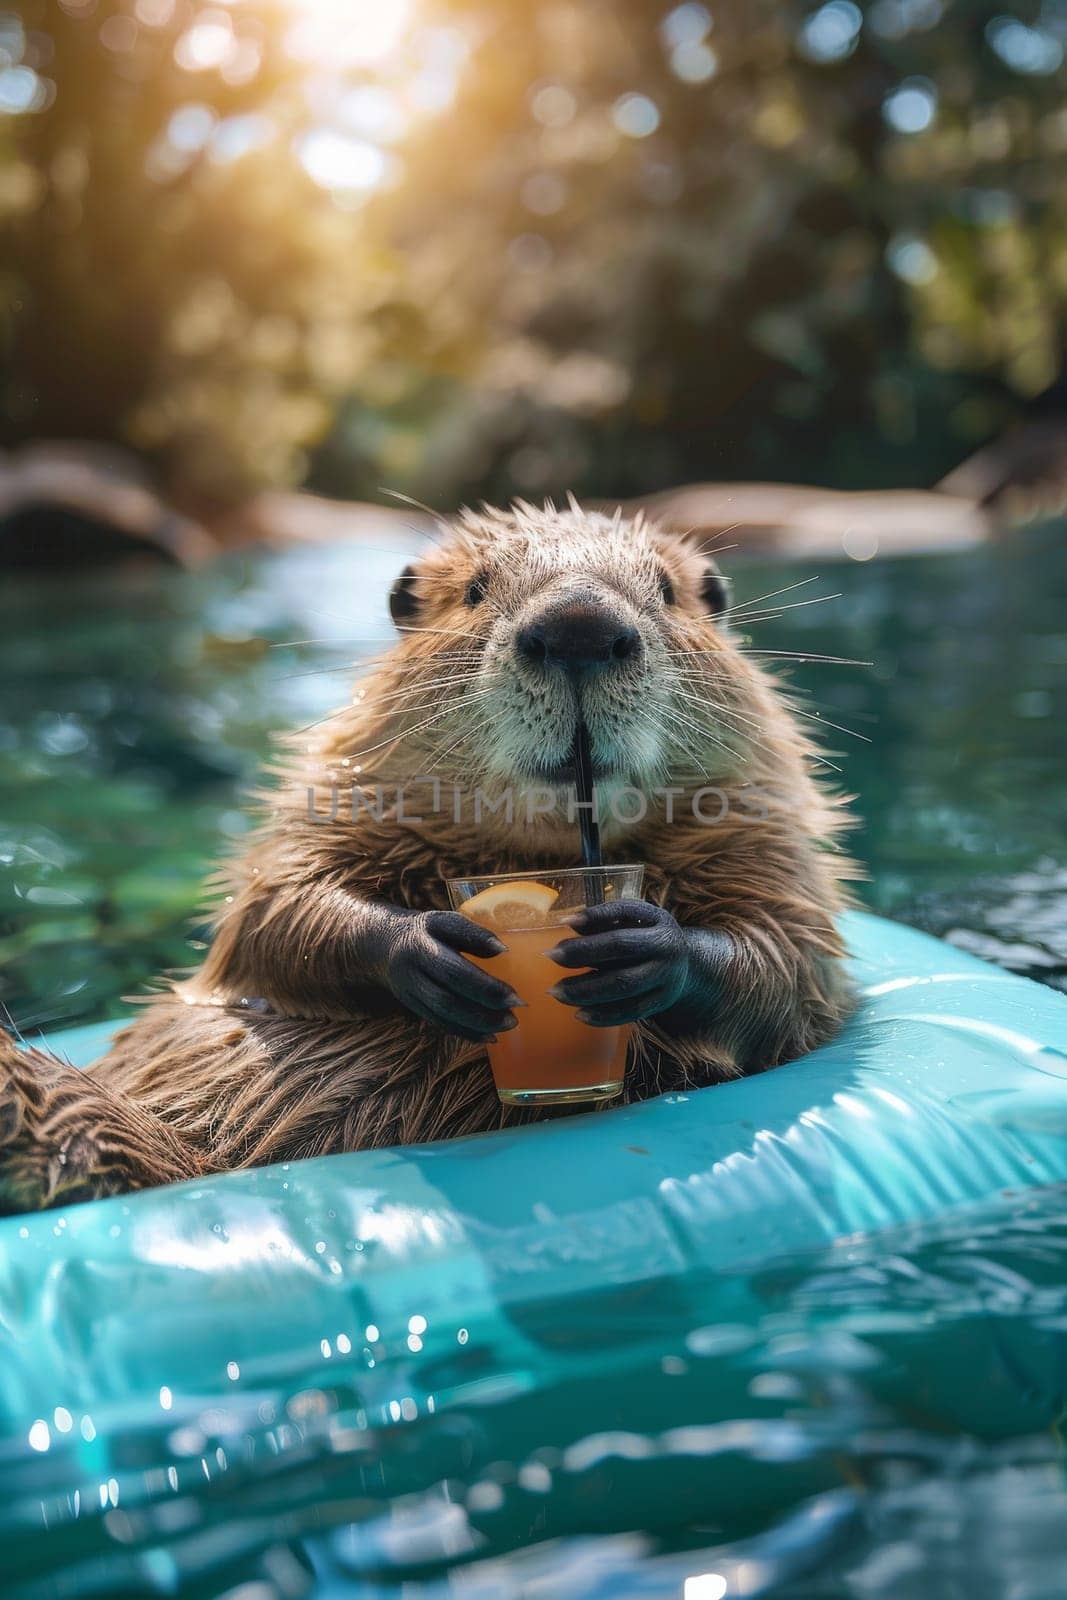 beaver animal is in a pool with a cup in its mouth by itchaznong